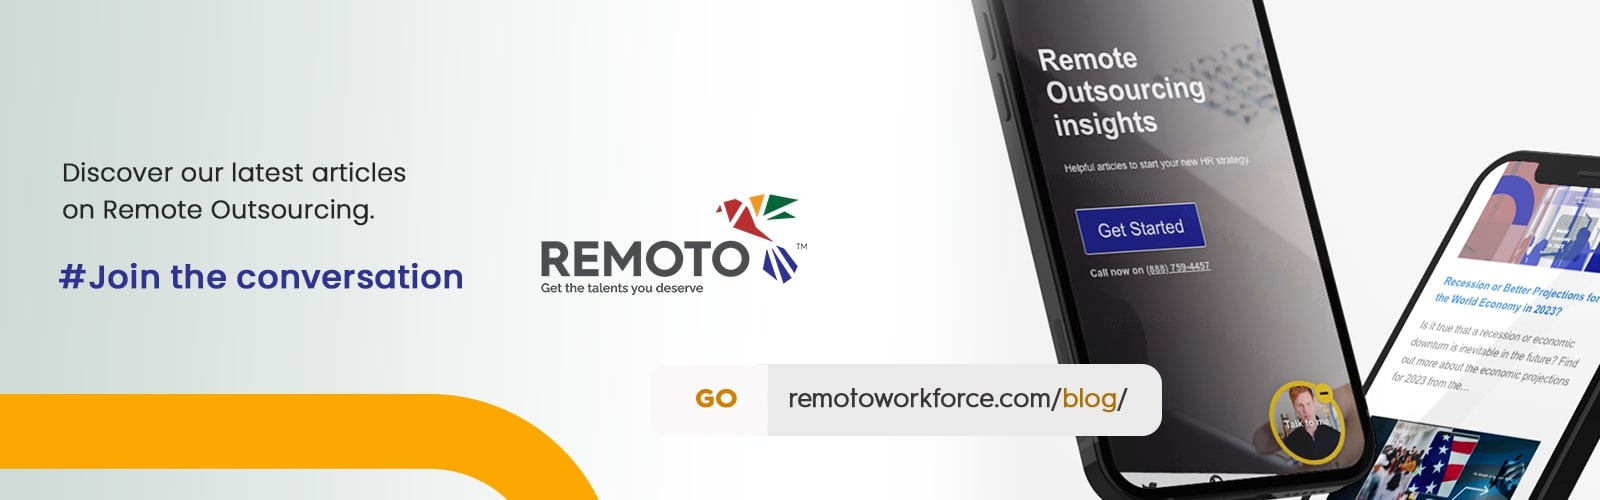 Embracing the Future of Remote Work with Nearshore Outsourcing - Remoto Workforce